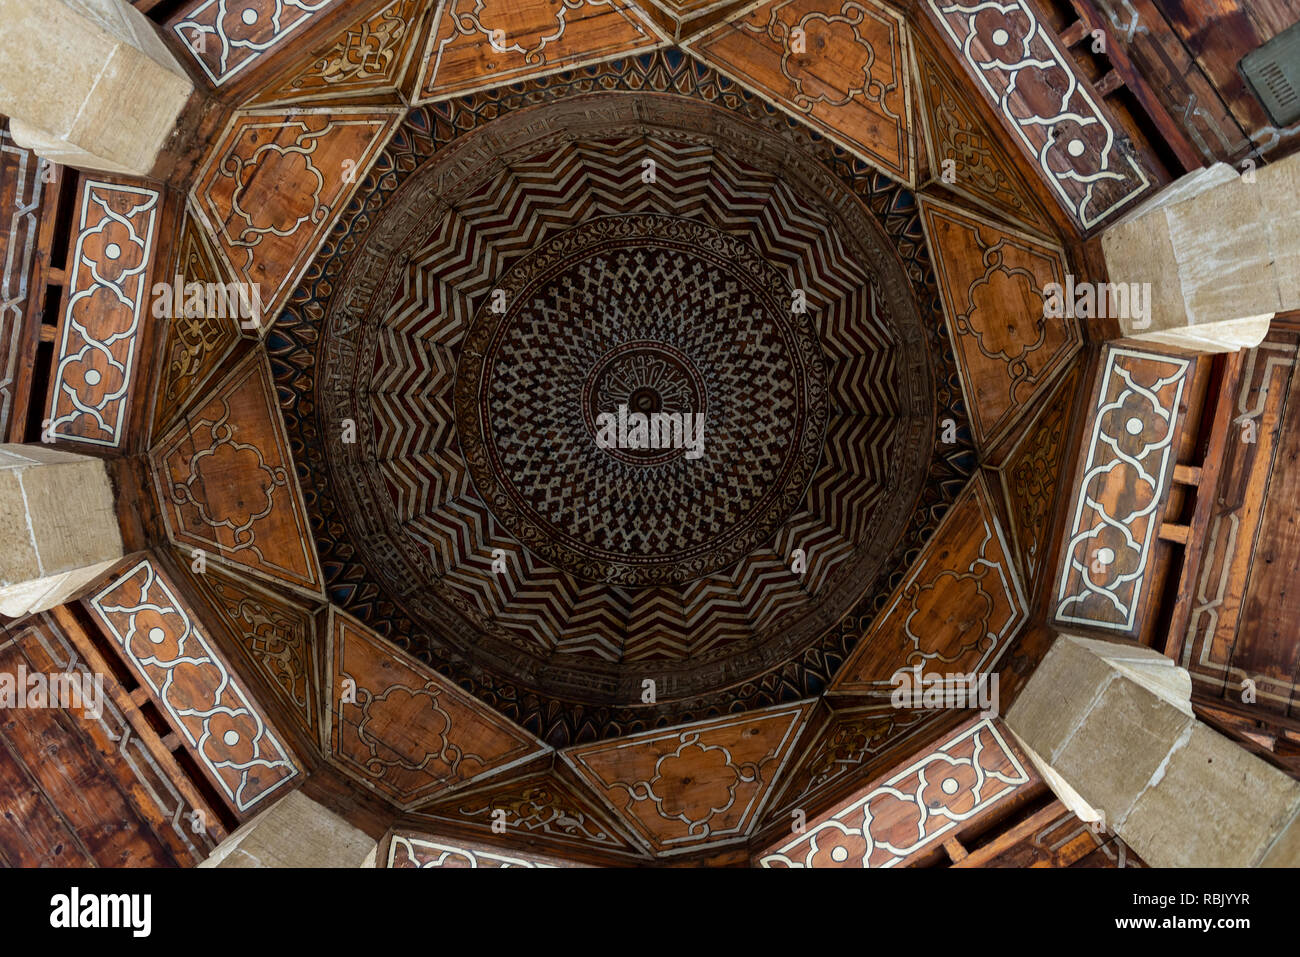 One of the many decorated ceilings at the Qalawun complex. The Qalawun complex (Arabic: مجمع قلاون) is a massive complex in islamic Cairo, Egypt that Stock Photo